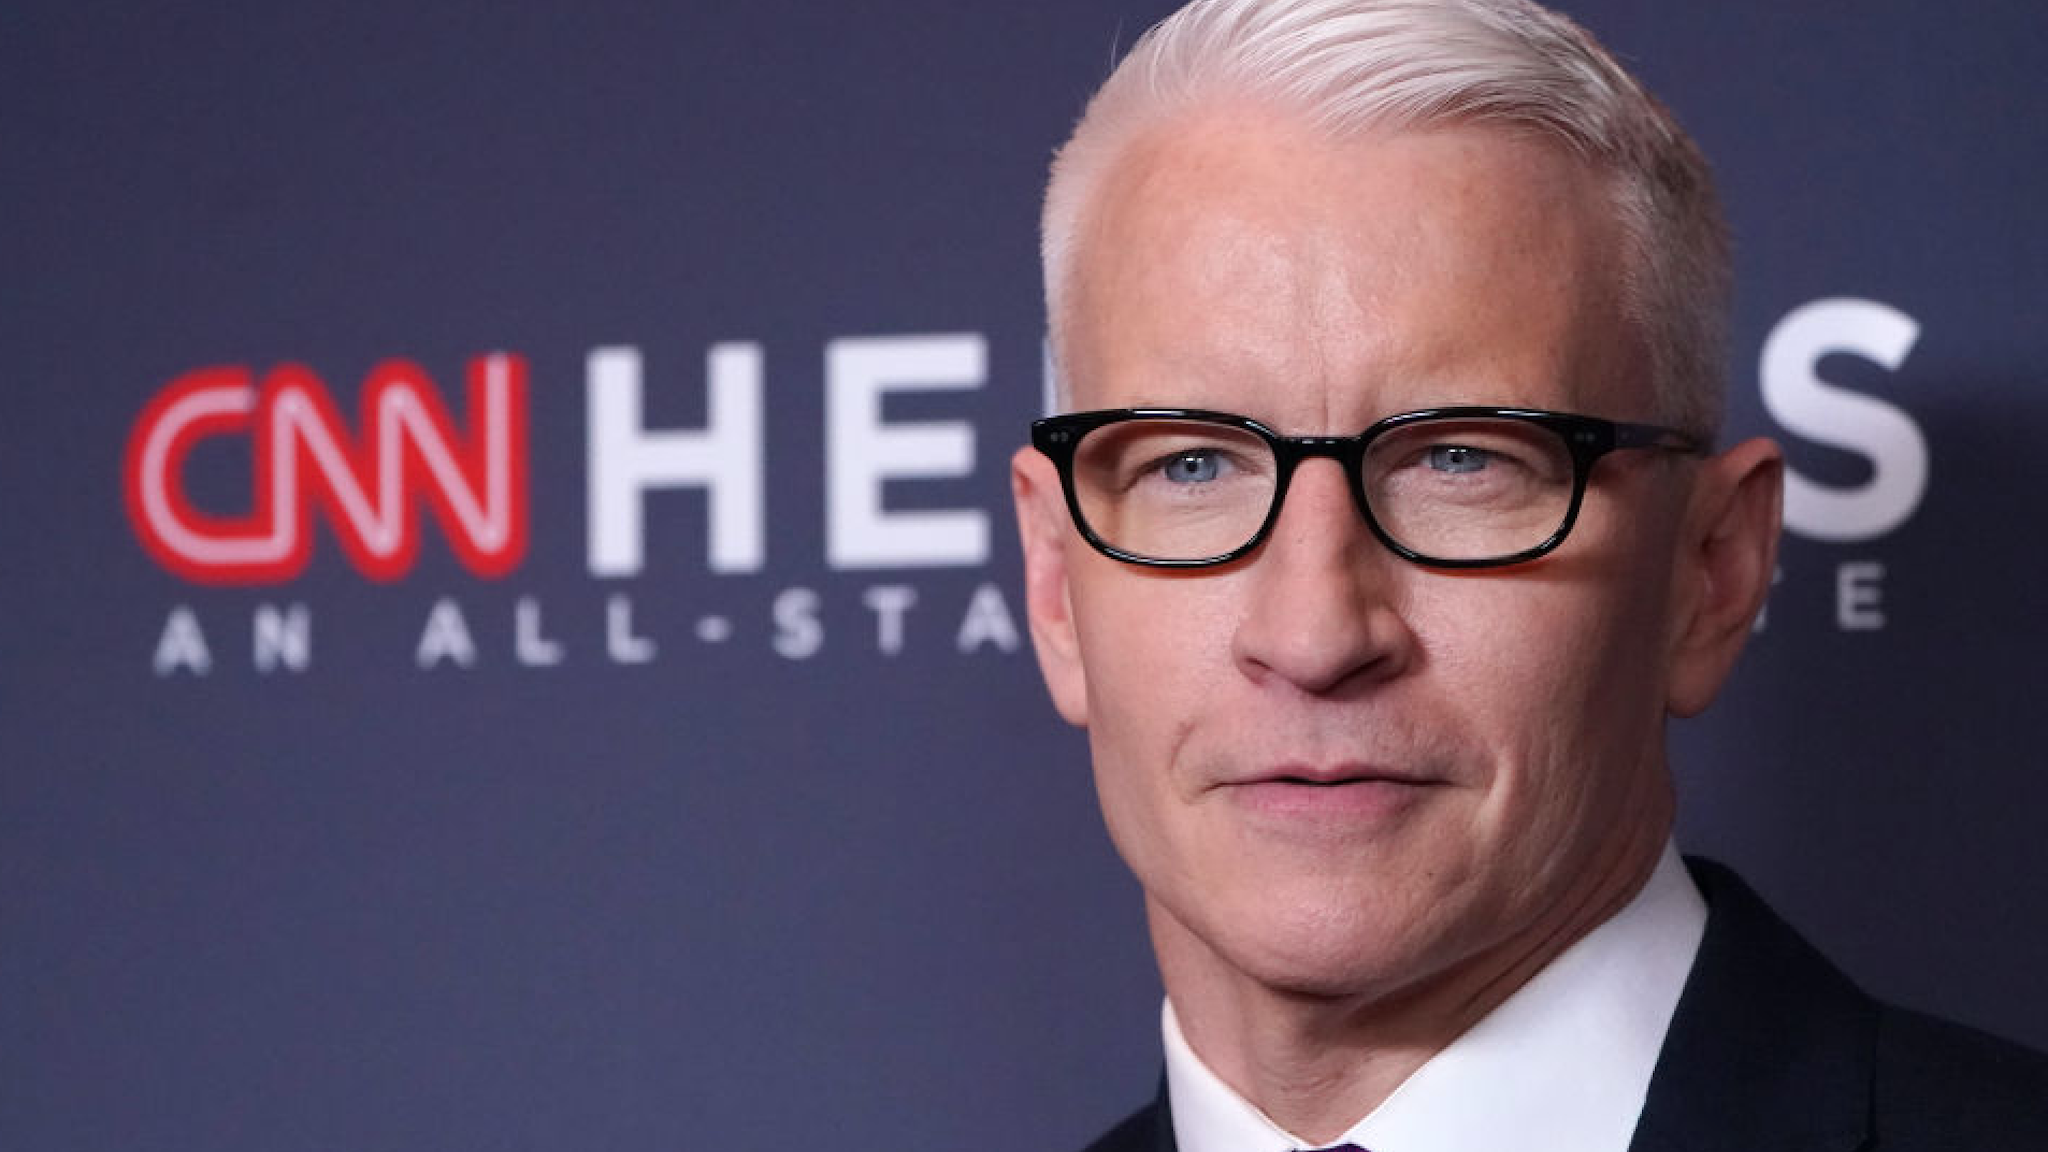 Anderson Cooper attends the 13th Annual CNN Heroes at the American Museum of Natural History on December 08, 2019 in New York City.